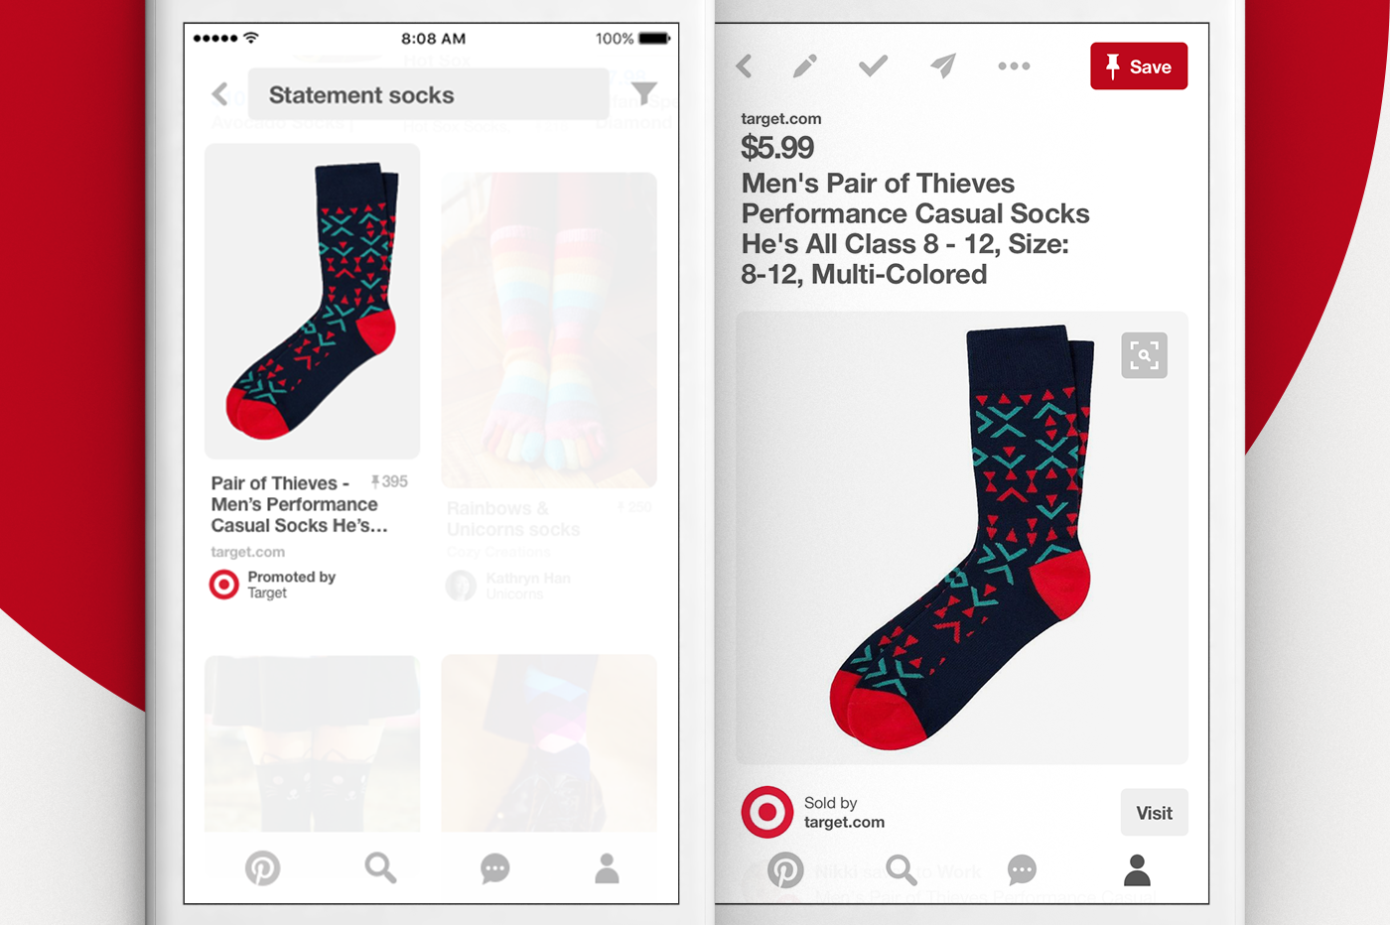 Pinterest adverts are becoming a digital marketing trend